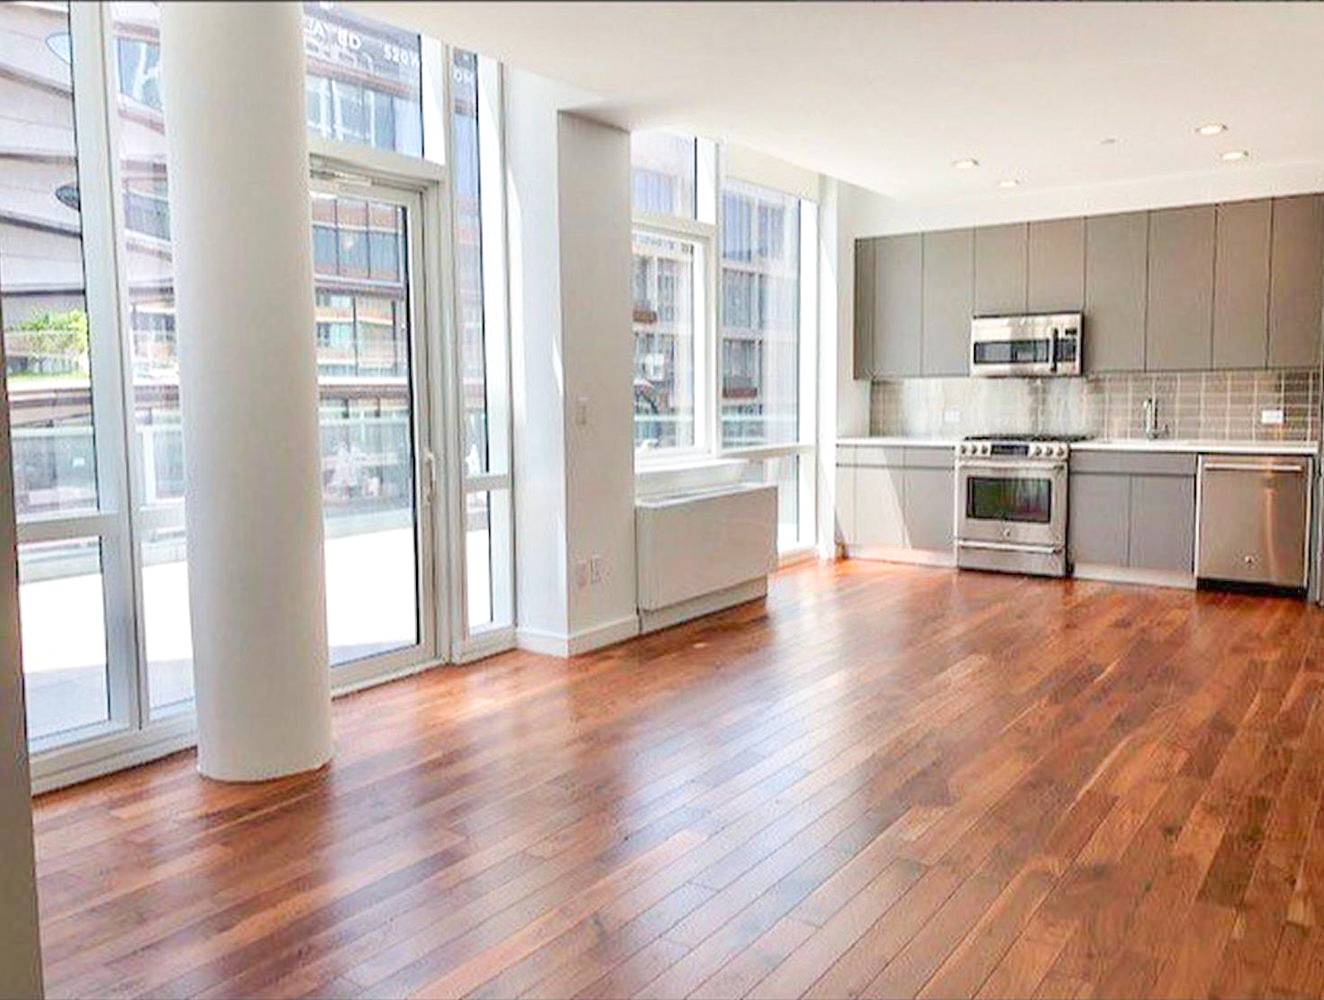 2 Bed 2.5 Bath | Duplex | Private Terrace | Home Office | Southern Views | Spiral Staircase | Washer + Dryer | Central A/C | Floor to Ceiling Windows | Luxury High-rise